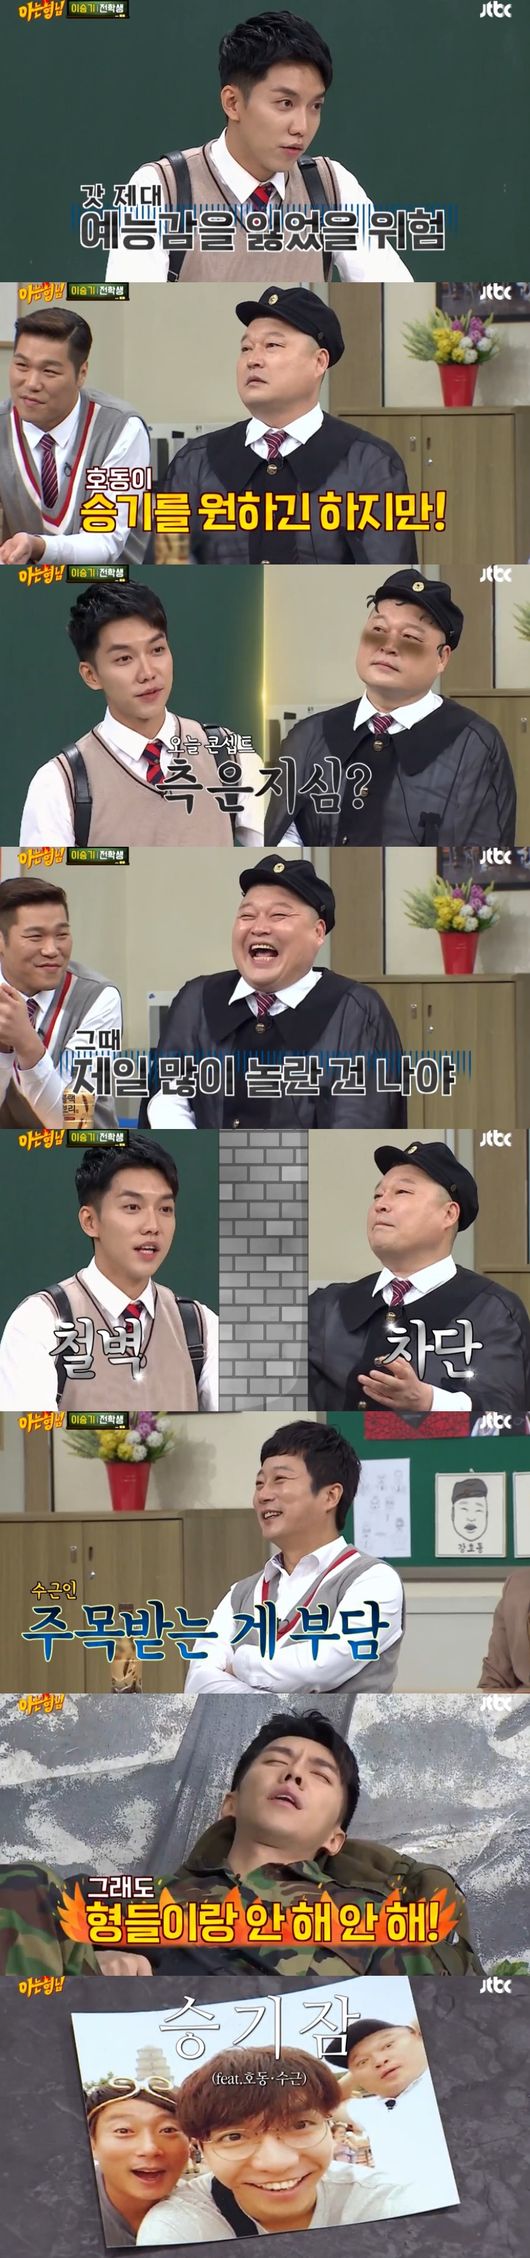 It is Kang Ho-dong, Lee Soo-geun, Lee Seung-gi shooting One Night Two Day from Brother I Know.Thanks to the audience rating chart, it was excellent.According to Nielsen Korea, an audience rating professional research firm on 22nd, JTBC brother you know - Lee Seung-gi edition broadcasted on 21th is 6.2% audience rating (national household standard) was recorded.This is the ratio compared to last time Yumin Sang - Munseun has appeared.It is a figure that gained 1 percentage point.However, topicality hotter than audience rating.Lee Seung-gi who came out to transfer students boasted a majesty that seems to be a name false entertainer emperor and attracted viewers from the cathode ray tube on the weekends evening.As usual a bonus pushed push.More than anything, the sea that attracted a hot topic in the reunion of Kang Ho-dong, Lee Soo-geun, Lee Seung-gi from before broadcasting.These are the hero who led the heyday through KBS 2 TV Happy Sunday - 1 night 2 days season 1 for 5 years since 2007.The picture of the three people since the whole area of ​​Lee Seung-gi at the end of last year is the first time this older brother I know.Therefore, viewers hoped for the first night two days Kemi of the past year and shouted the older brother I know in Japan.Kang Ho-dong, Lee Soo-geun, Lee Seung-gi boasted unchanged compatibility breathing to meet viewers expectations.Kang Ho-dong Take Lee Seung-gi was still as usual Fortunetely thanks to the three people, the game became better.Kang Ho-dongs My brother Lee Seung-gi love is even more robust, Lee Seung-gi has a relaxing and comfortable smile with big brothers and entertainment.It was a different laugh from the time of the fixed appearance SBS The Butler Division.The viewers also made a smileful Saturday.One night two days from a brother you know while biting the season of the season one members such as Kang Ho-dong, Lee Soo-geun, Lee Seung-gi, Lee Seung-gi, Un Ji Won, MC Mon, Kim Jung Min It reminds me.Kang Ho-dong, Lee Seung-gi, Lee Soo-geun warmly greeted the tea room with Three Brothers of Entertainment who believes.Brother I know